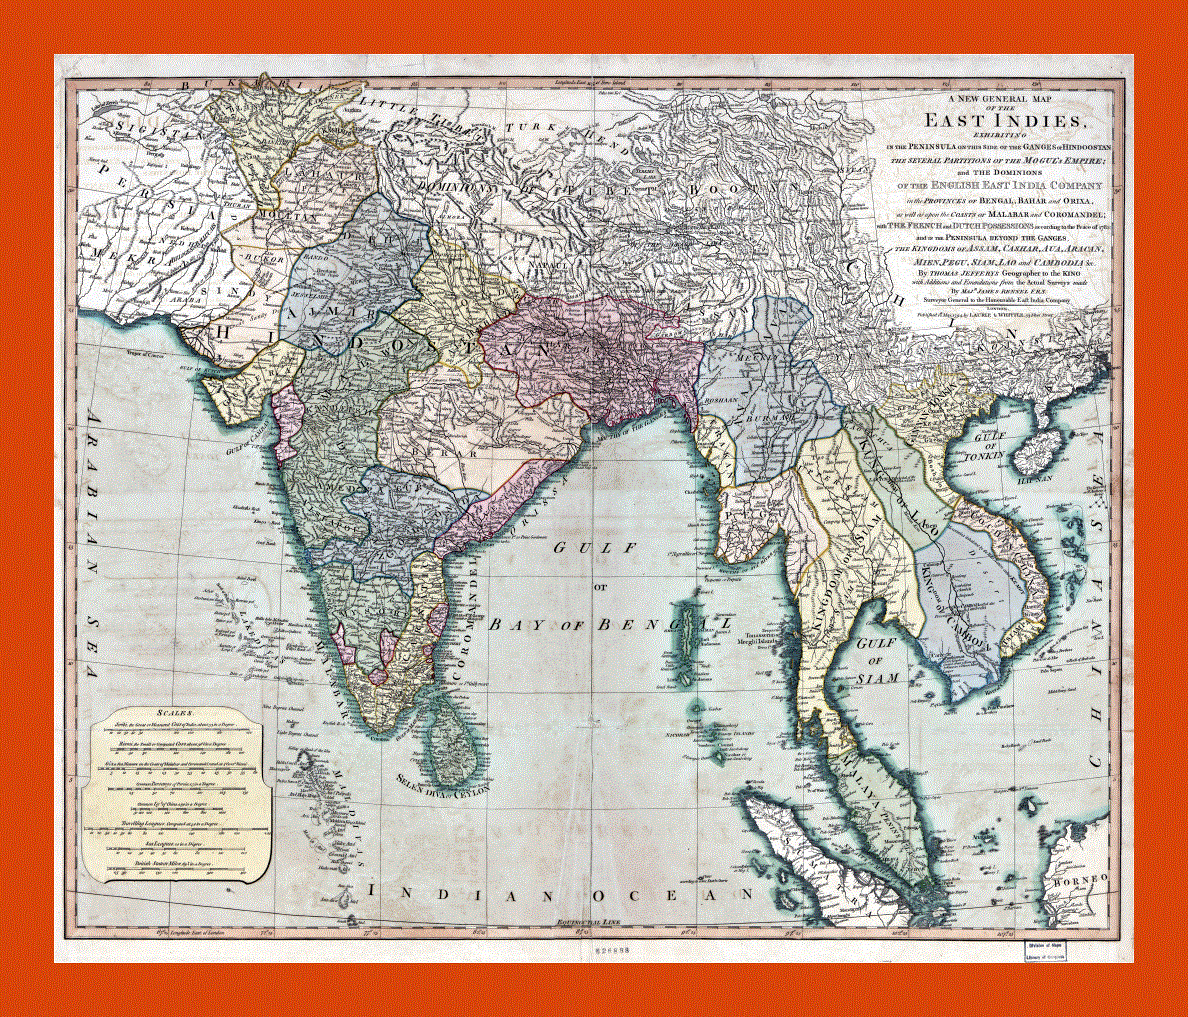 Antique general map of the East Indies - 1794